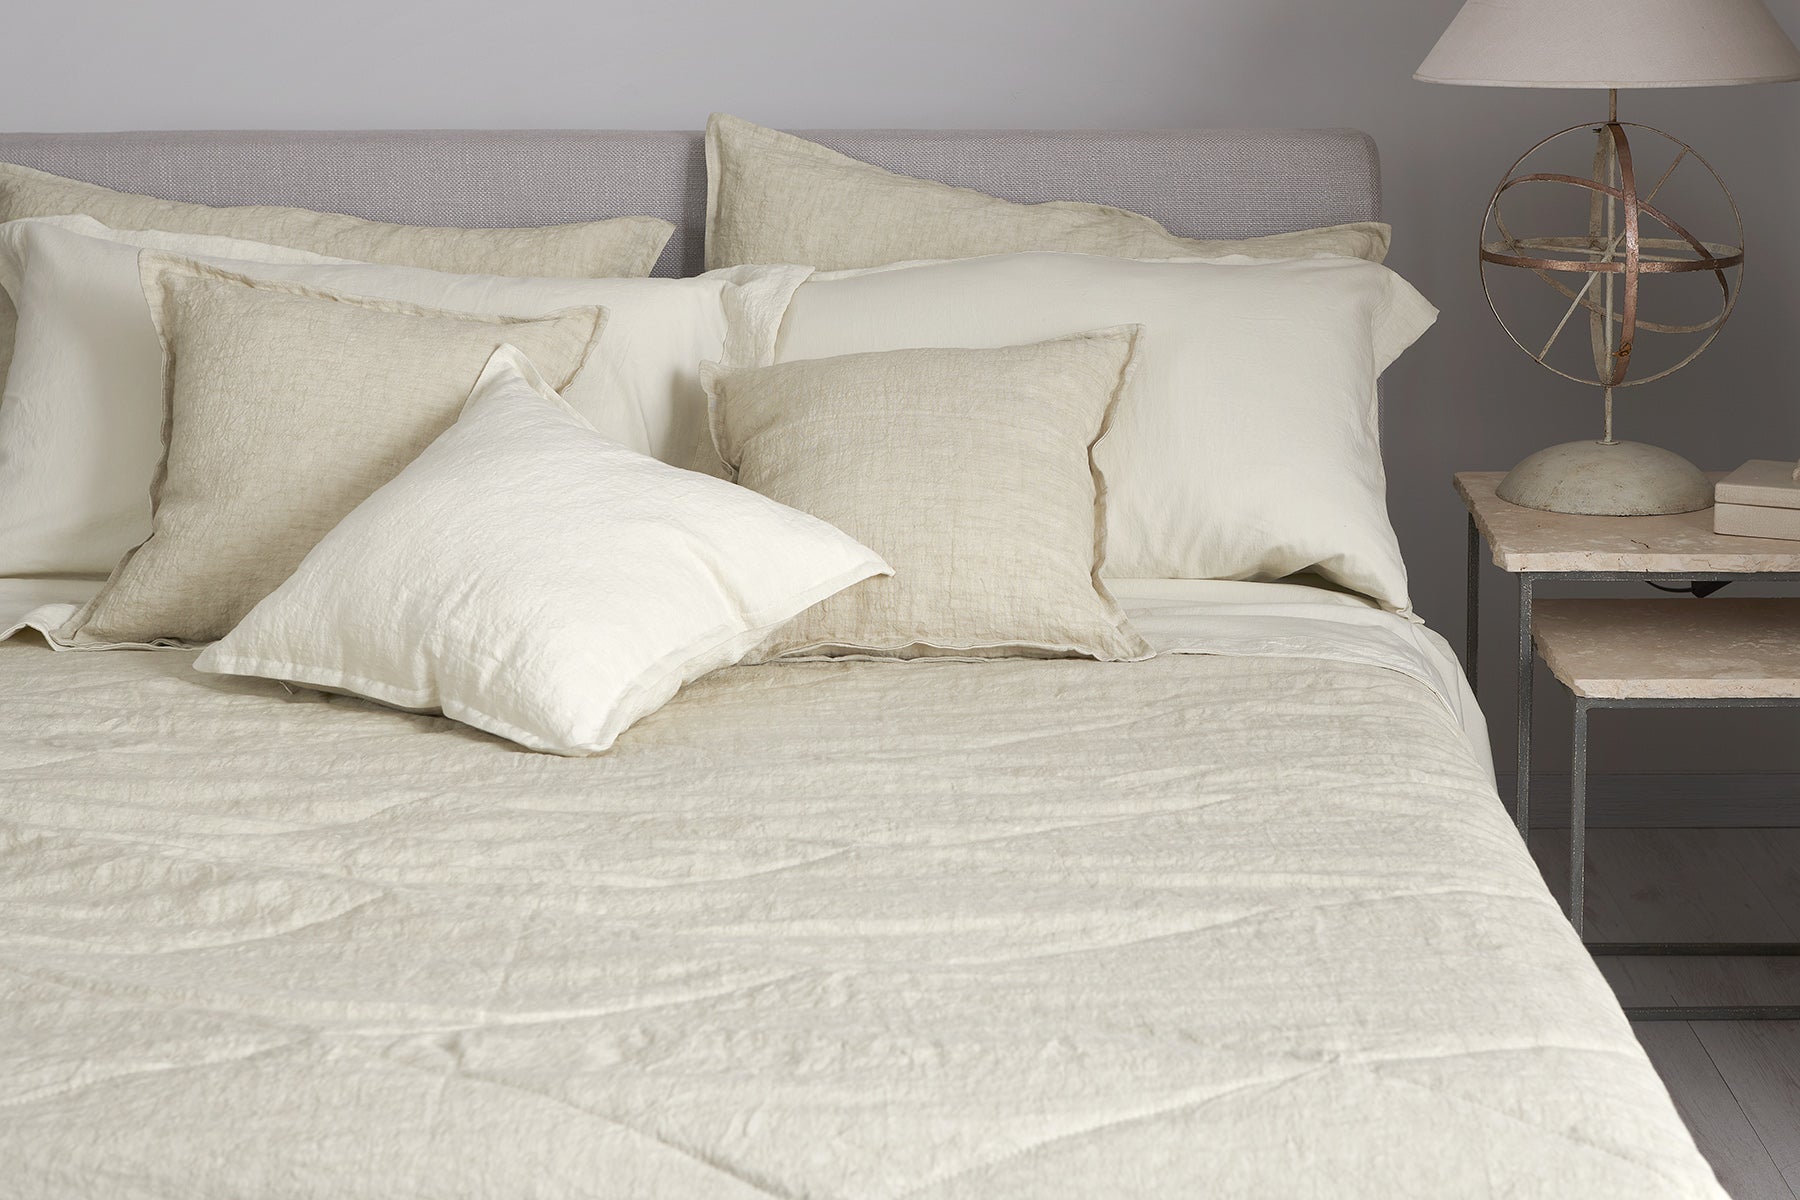 Quilted bedspread Day by Day rombi orizzontali